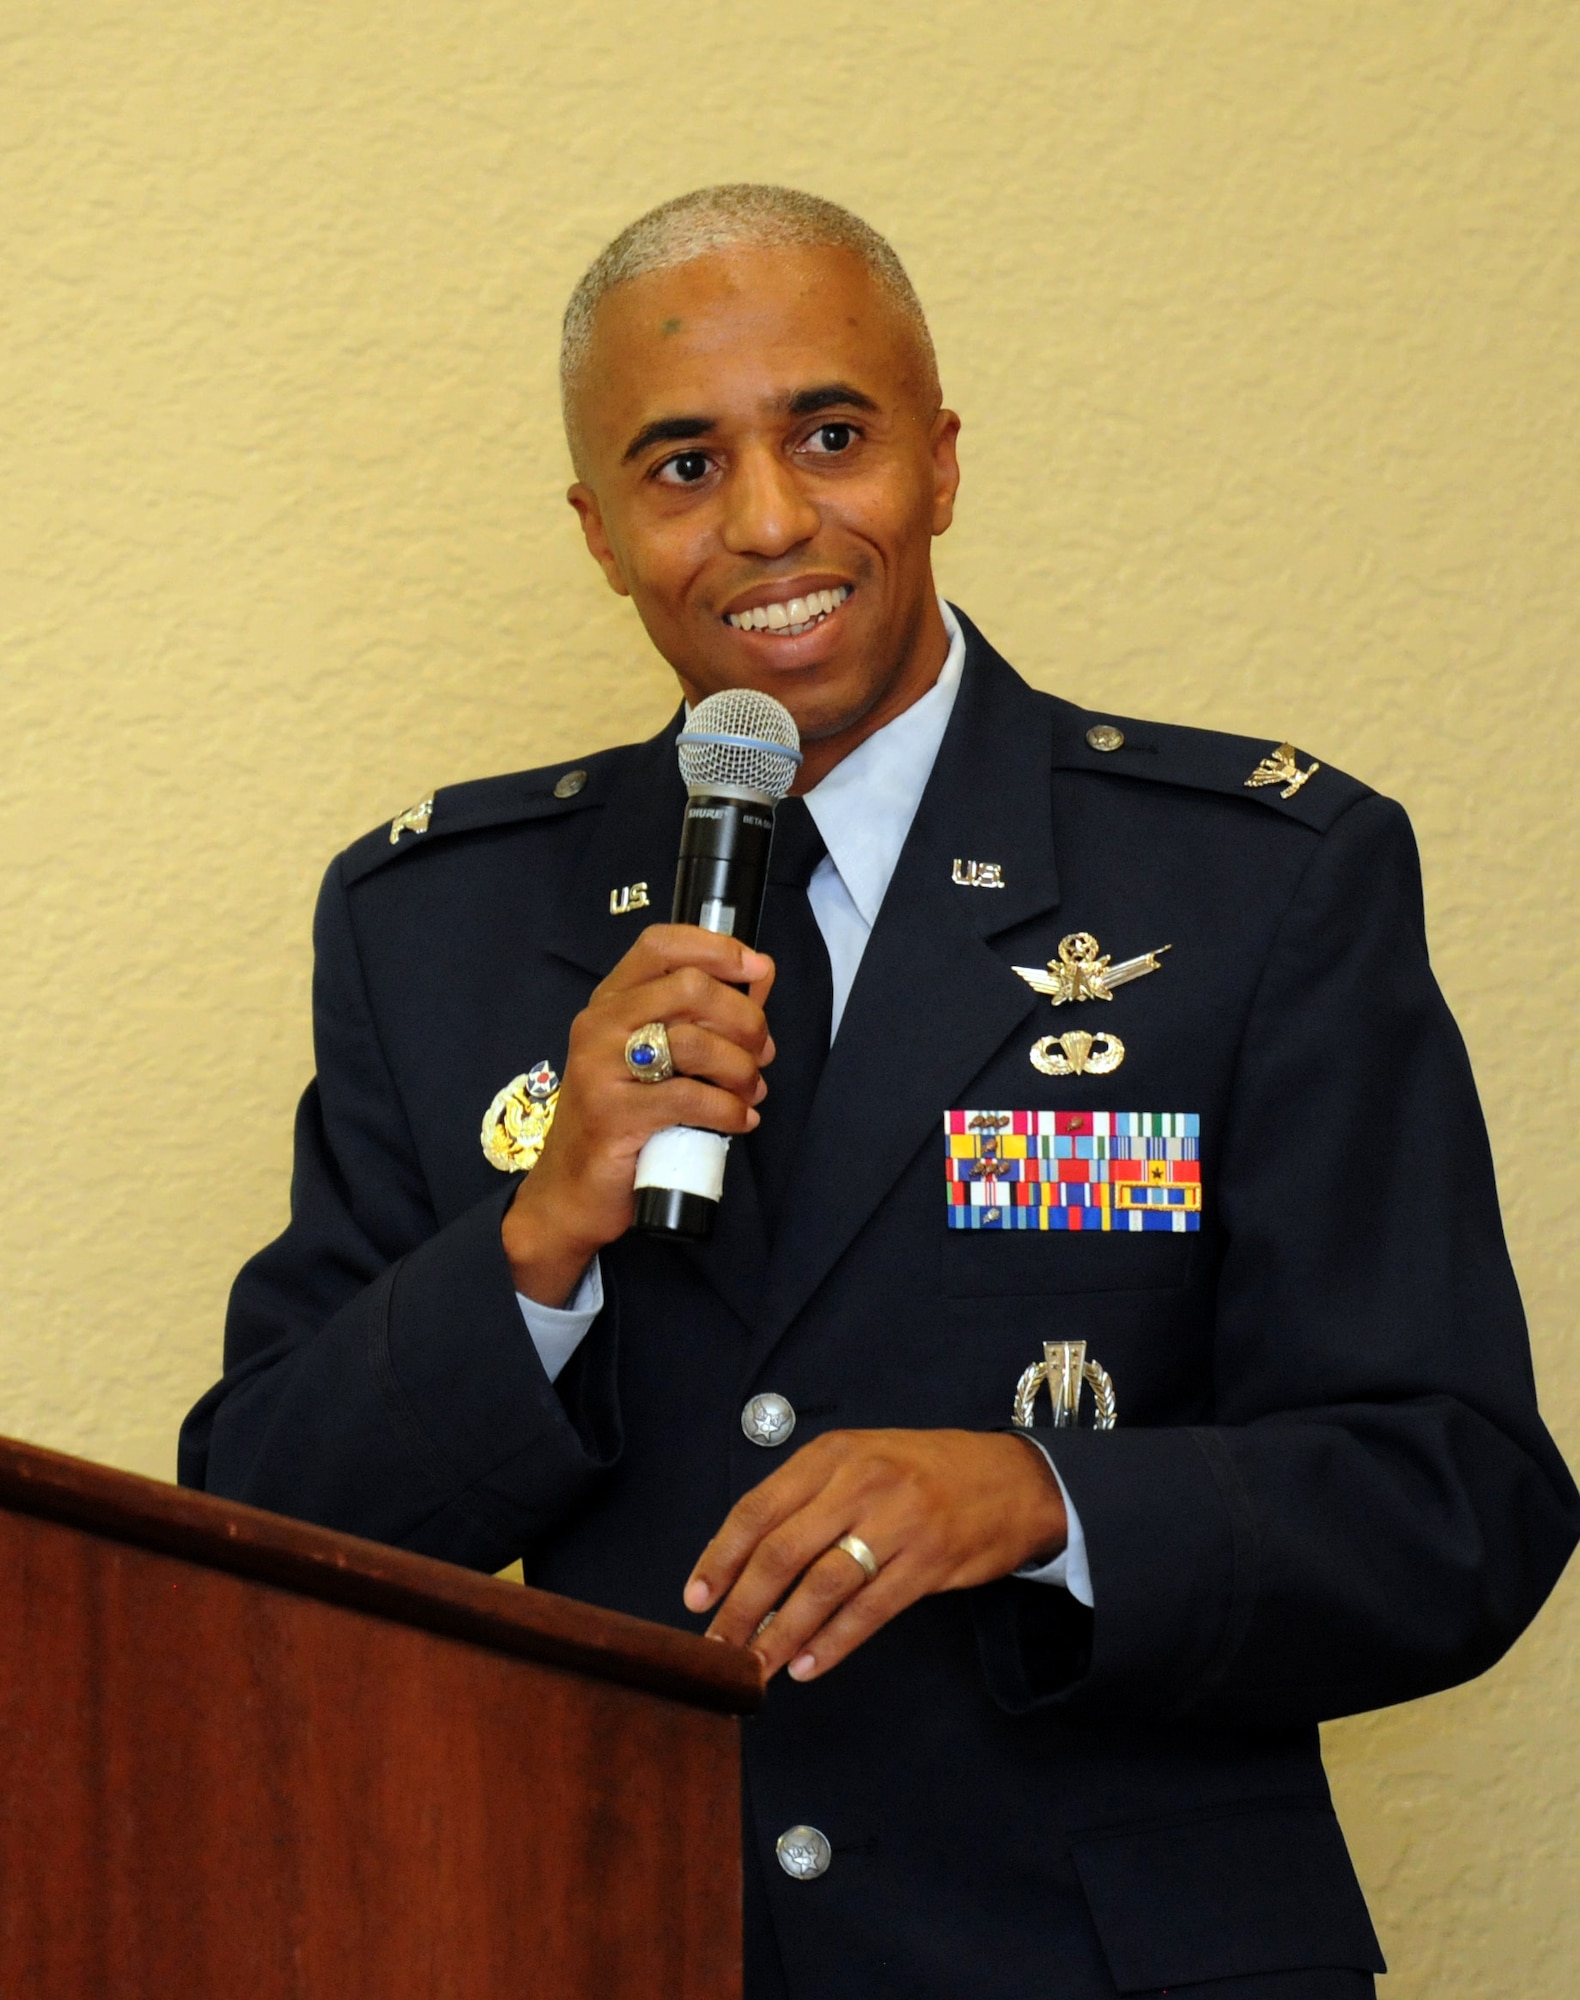 Col. Fred Taylor, Jr., Joint Space Operations Center deputy director and National Reconnaissance Office Liaison, Vandenberg Air Force Base, Calif., delivers remarks about the career of Chief Master Sgt. Robert Winters, 81st Training Group superintendent, during his retirement ceremony at the Bay Breeze Event Center Sept. 8, 2016, on Keesler AFB, Miss. Winters retired with more than 29 years of military service and served multiple assignments in California, Louisiana, Georgia, Colorado, Korea and the United Kingdom. He also worked as an electronic warfare officer in support of more than 700 soldiers in multiple locations throughout Iraq. (U.S. Air Force photo by Kemberly Groue/Released)